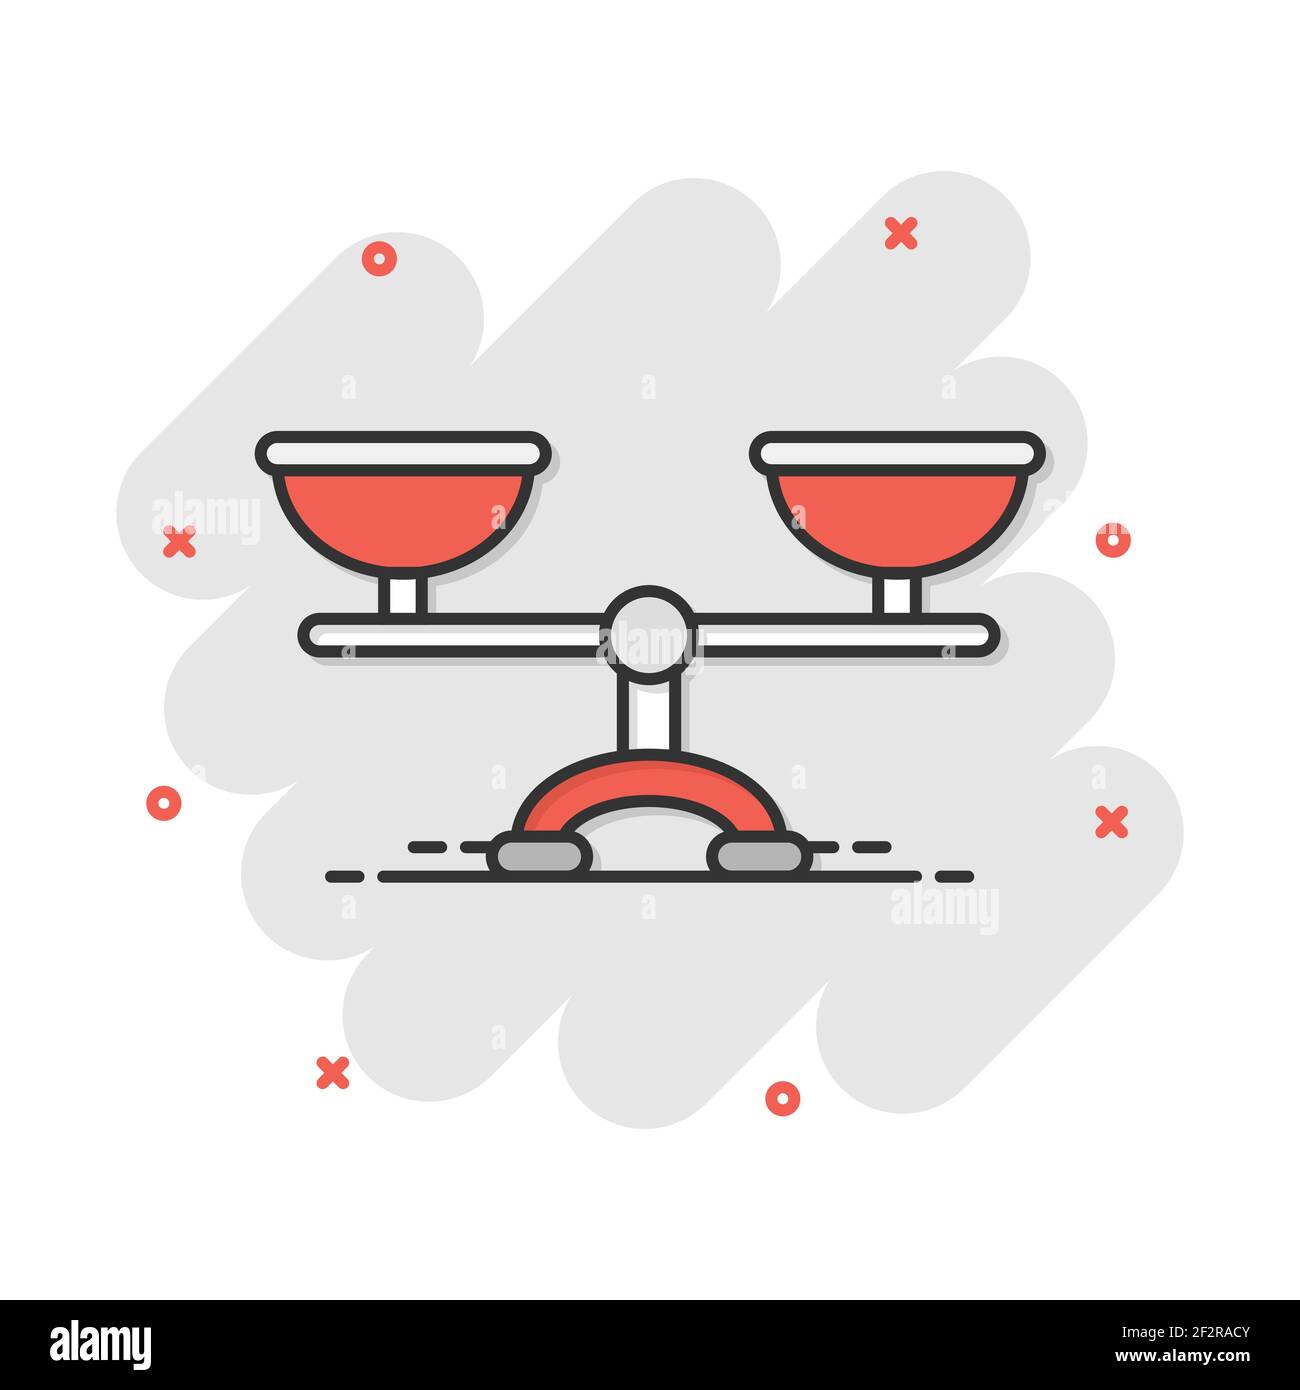 https://c8.alamy.com/comp/2F2RACY/vector-cartoon-scale-weigher-icon-in-comic-style-weigher-sign-illustration-pictogram-balance-business-splash-effect-concept-2F2RACY.jpg